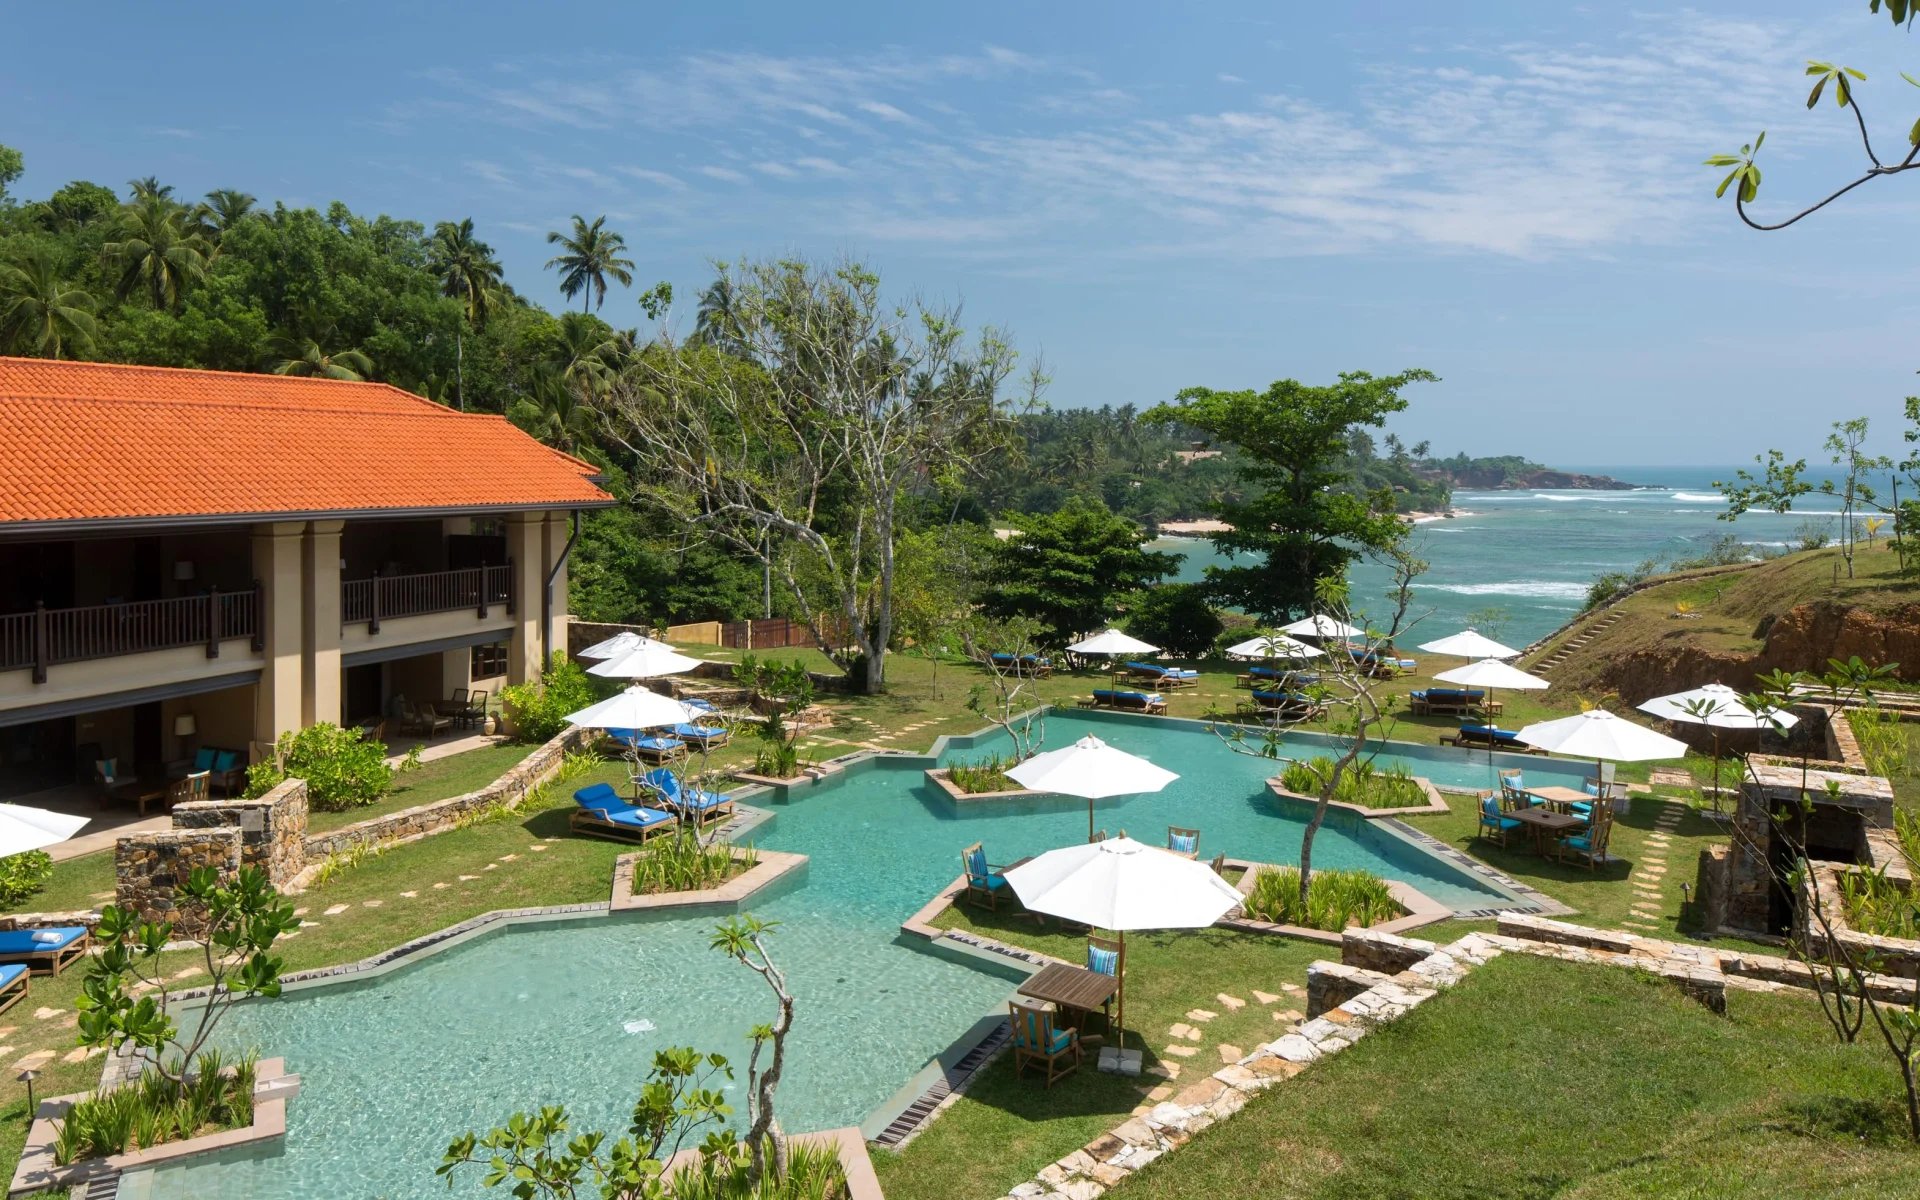 Cape Weligama has a pool overlooking the sea. 